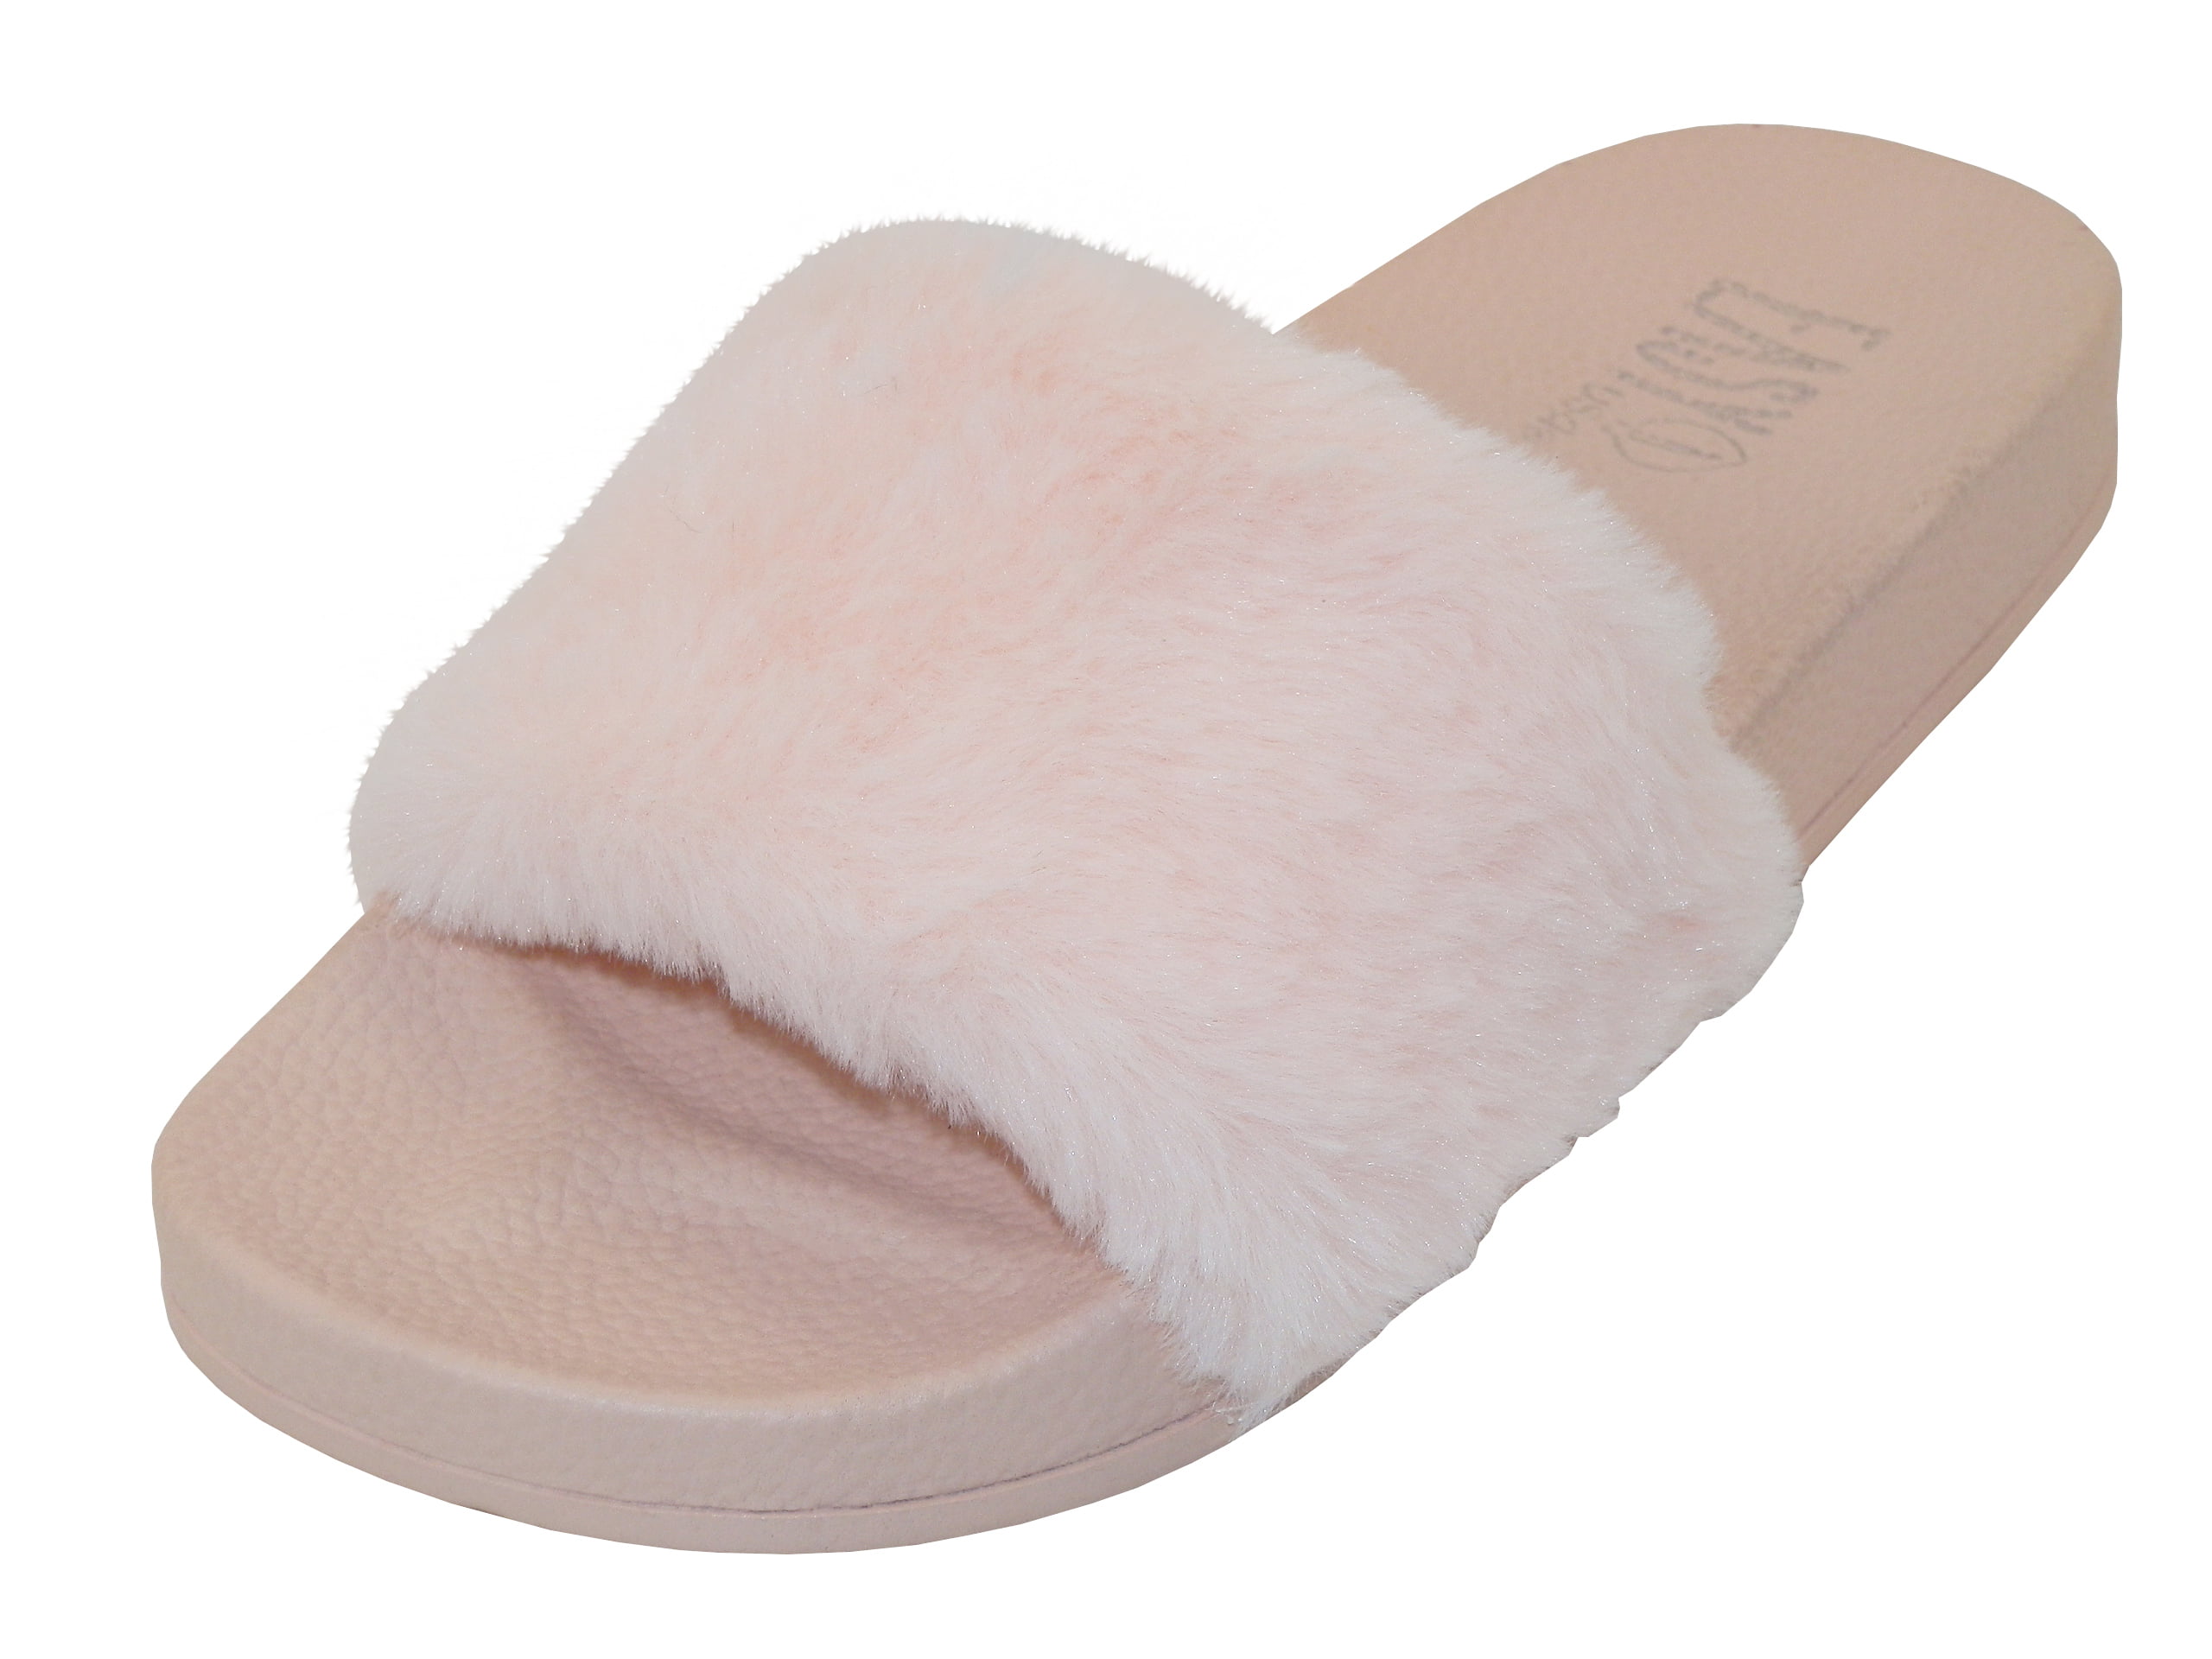 Womens Slippers with Faux Fur Flat Slides Size 6-11. - Walmart.com